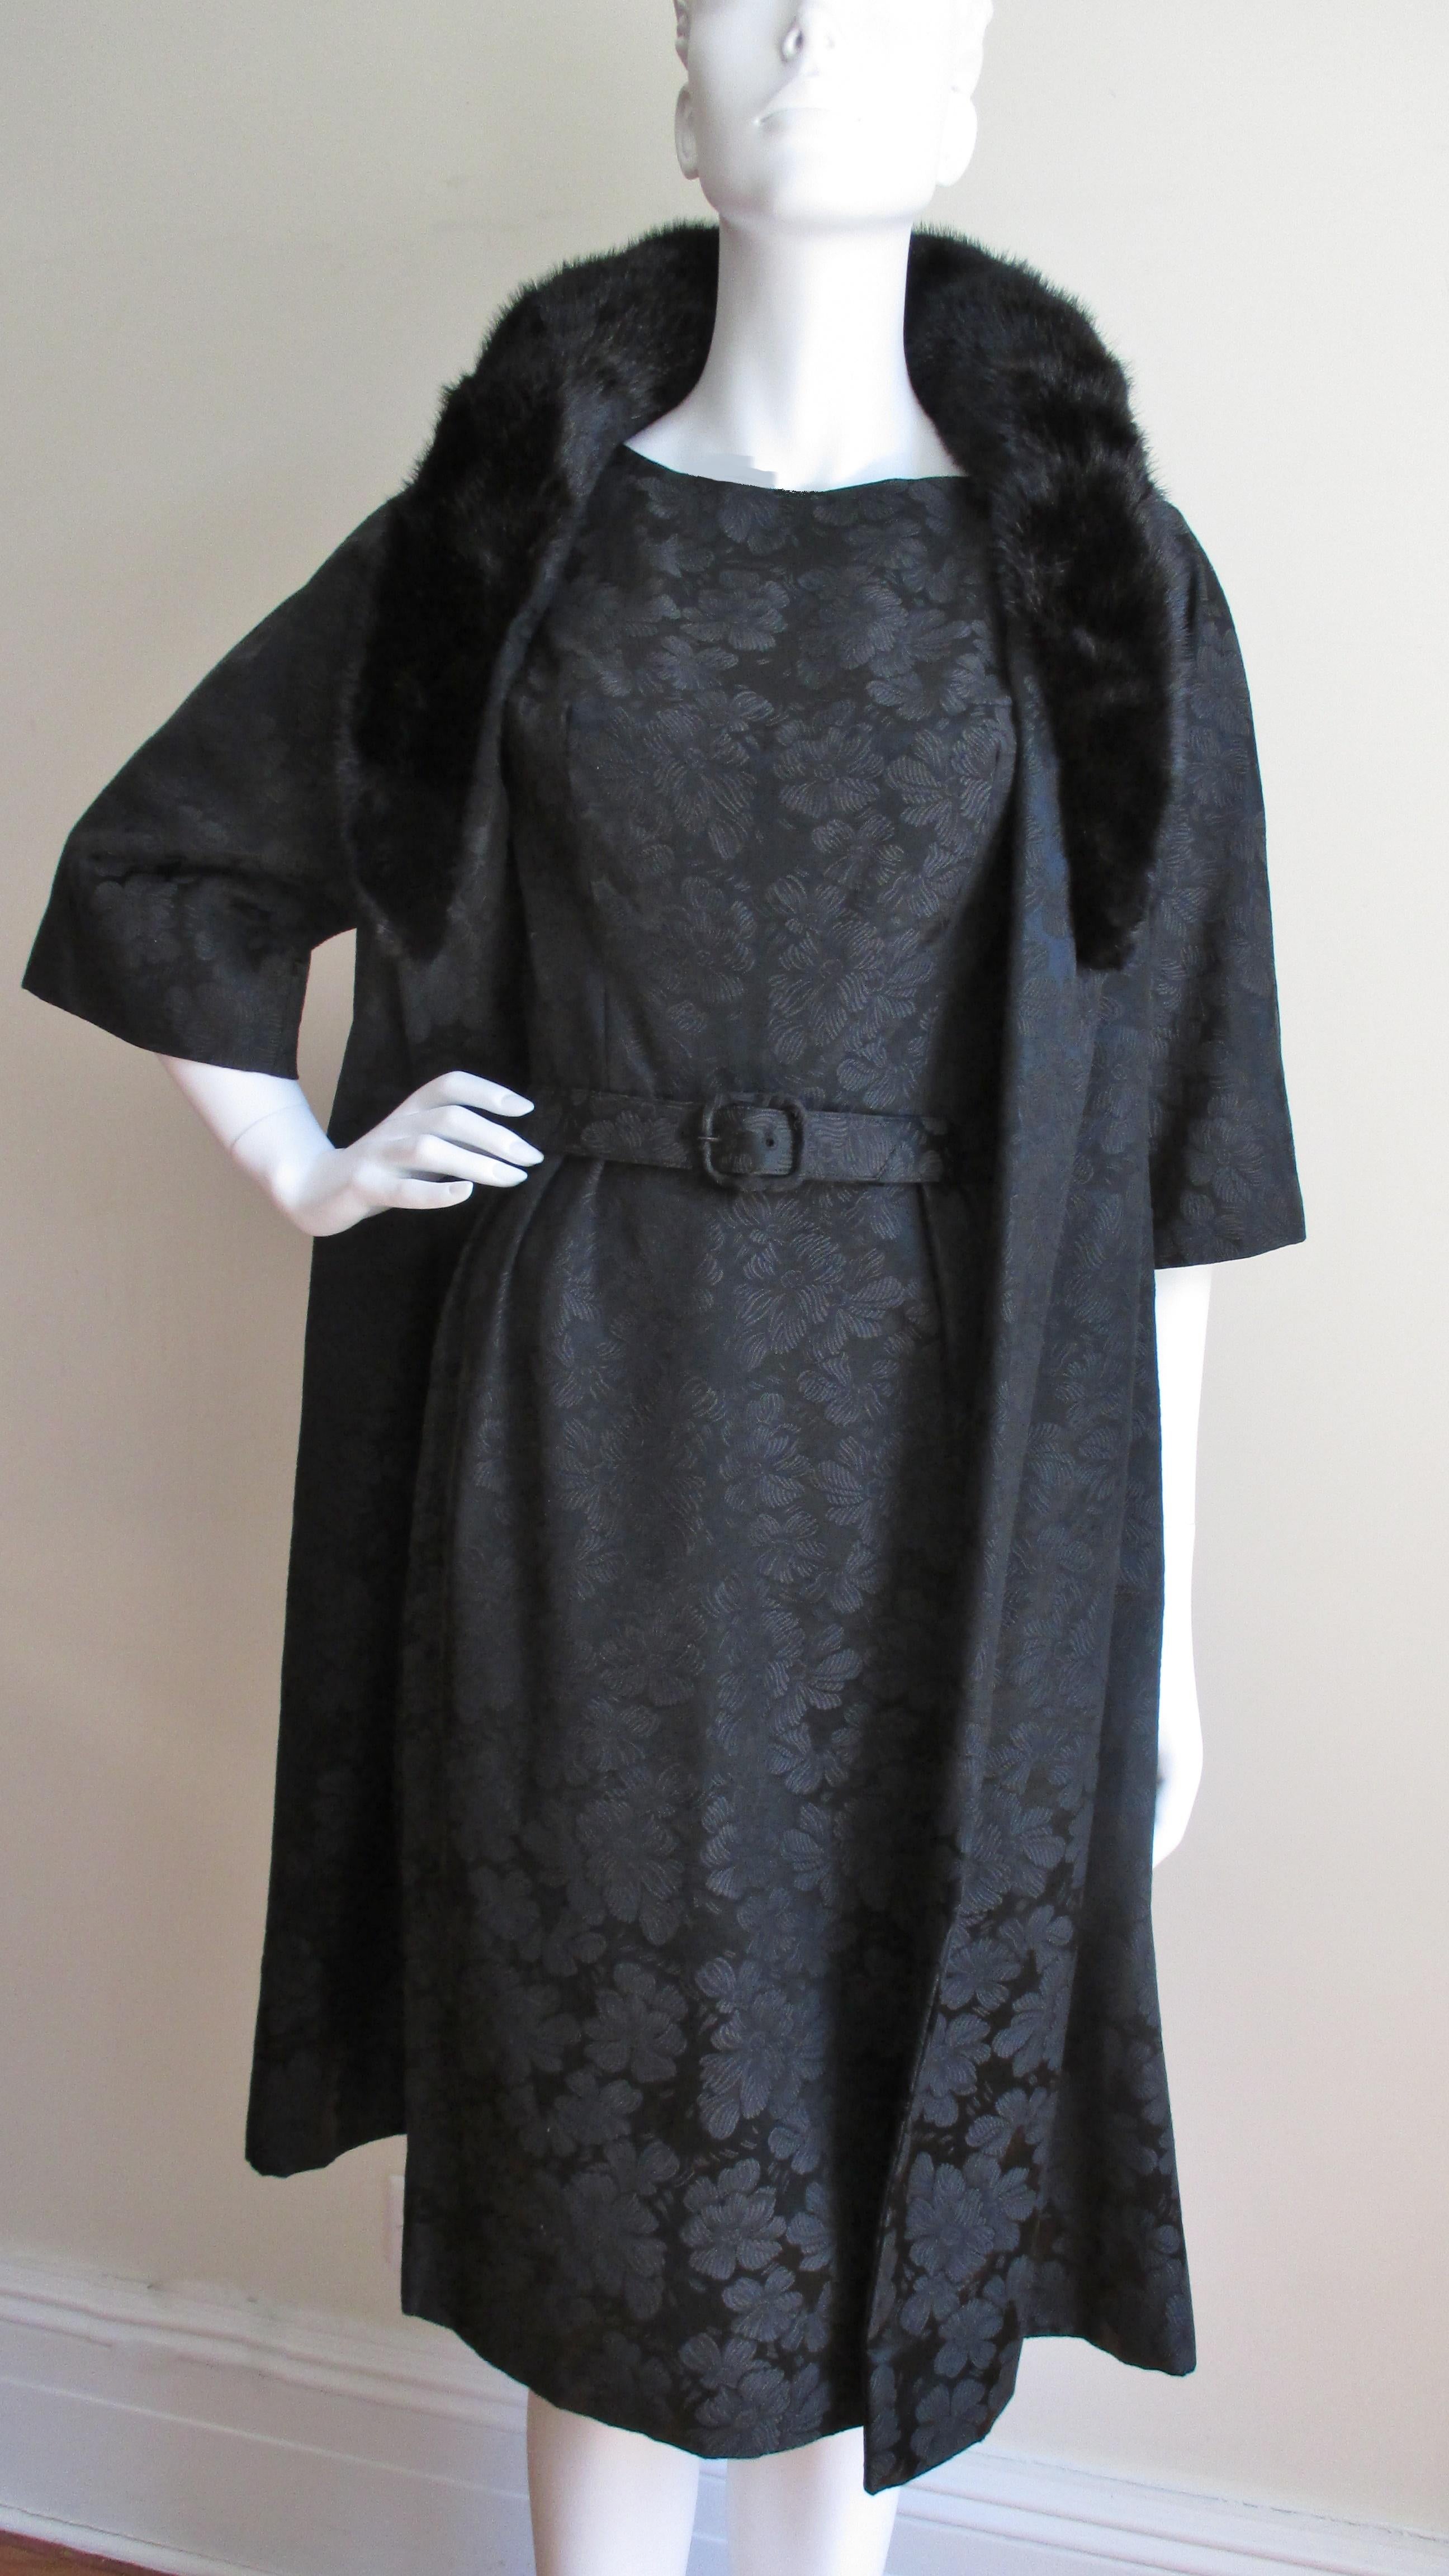 A rare, new 1950s dress and coat set from Lillie Rubin in a black silk damask flower pattern. The dress is semi fitted with a matching belt, a bateau neckline, and a straight skirt. The elbow length raglan sleeve coat falls from the shoulders in an